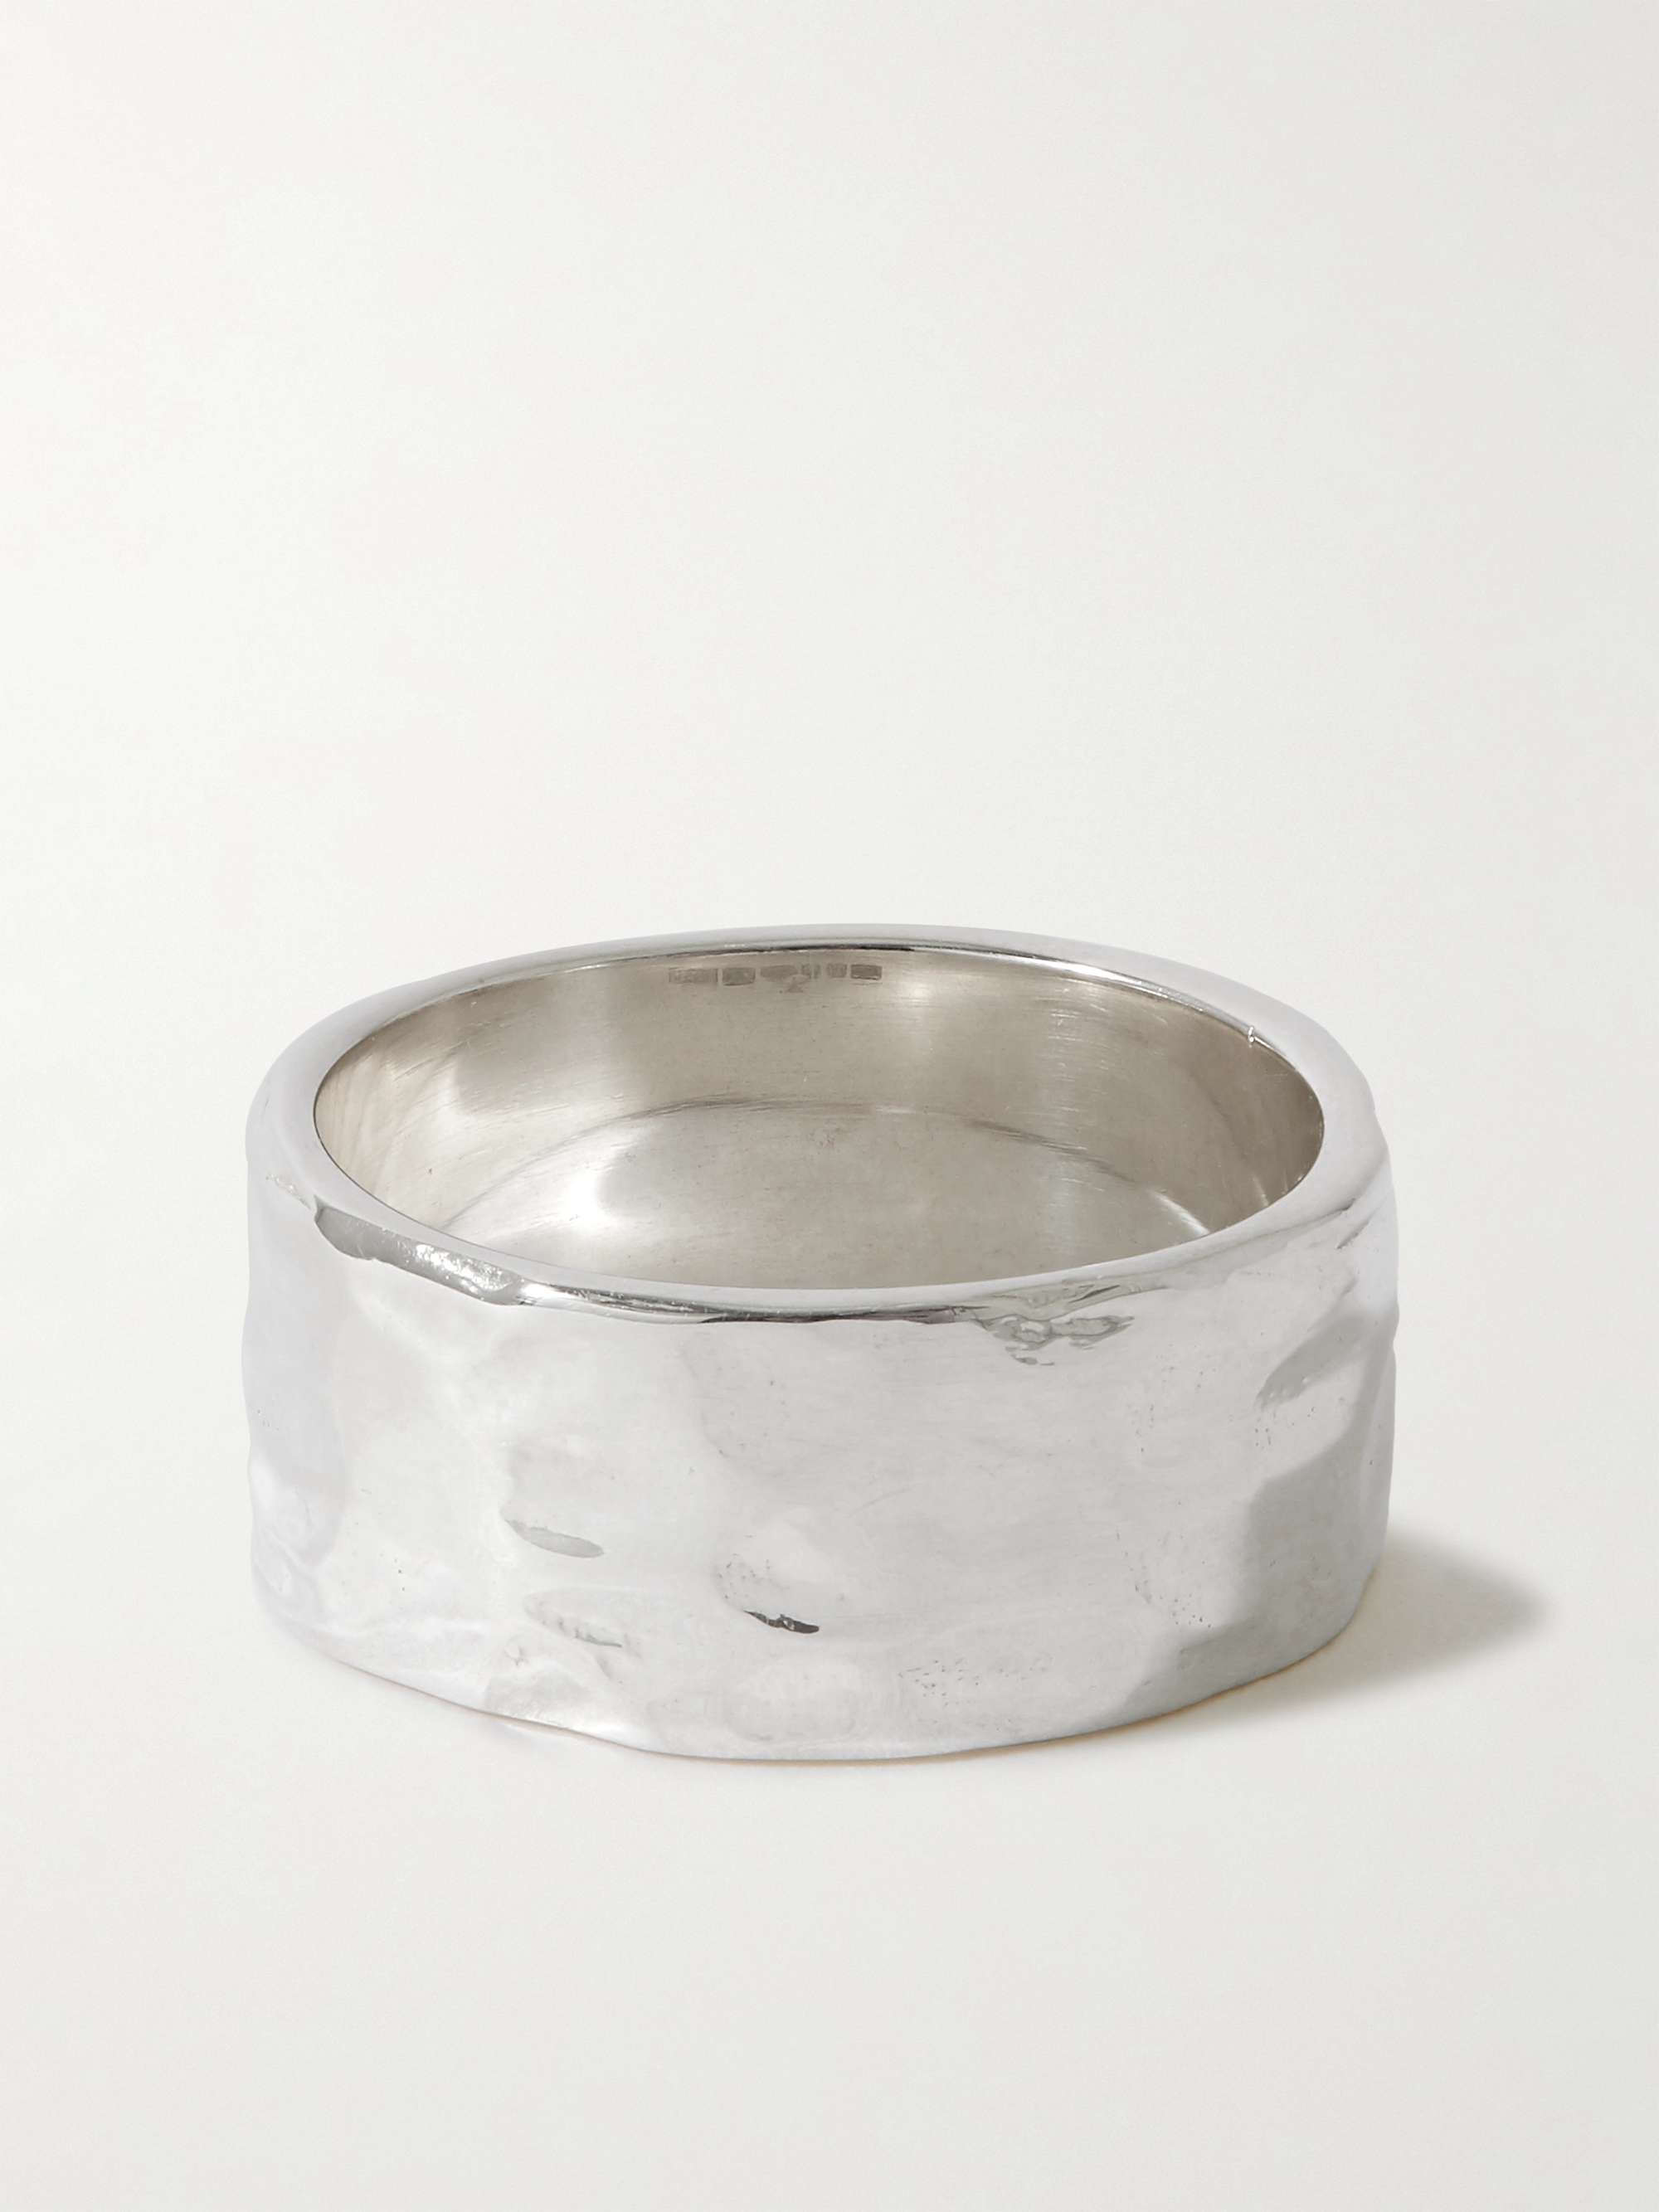 BLEUE BURNHAM The Permanent Hammered Recycled Sterling Silver Ring